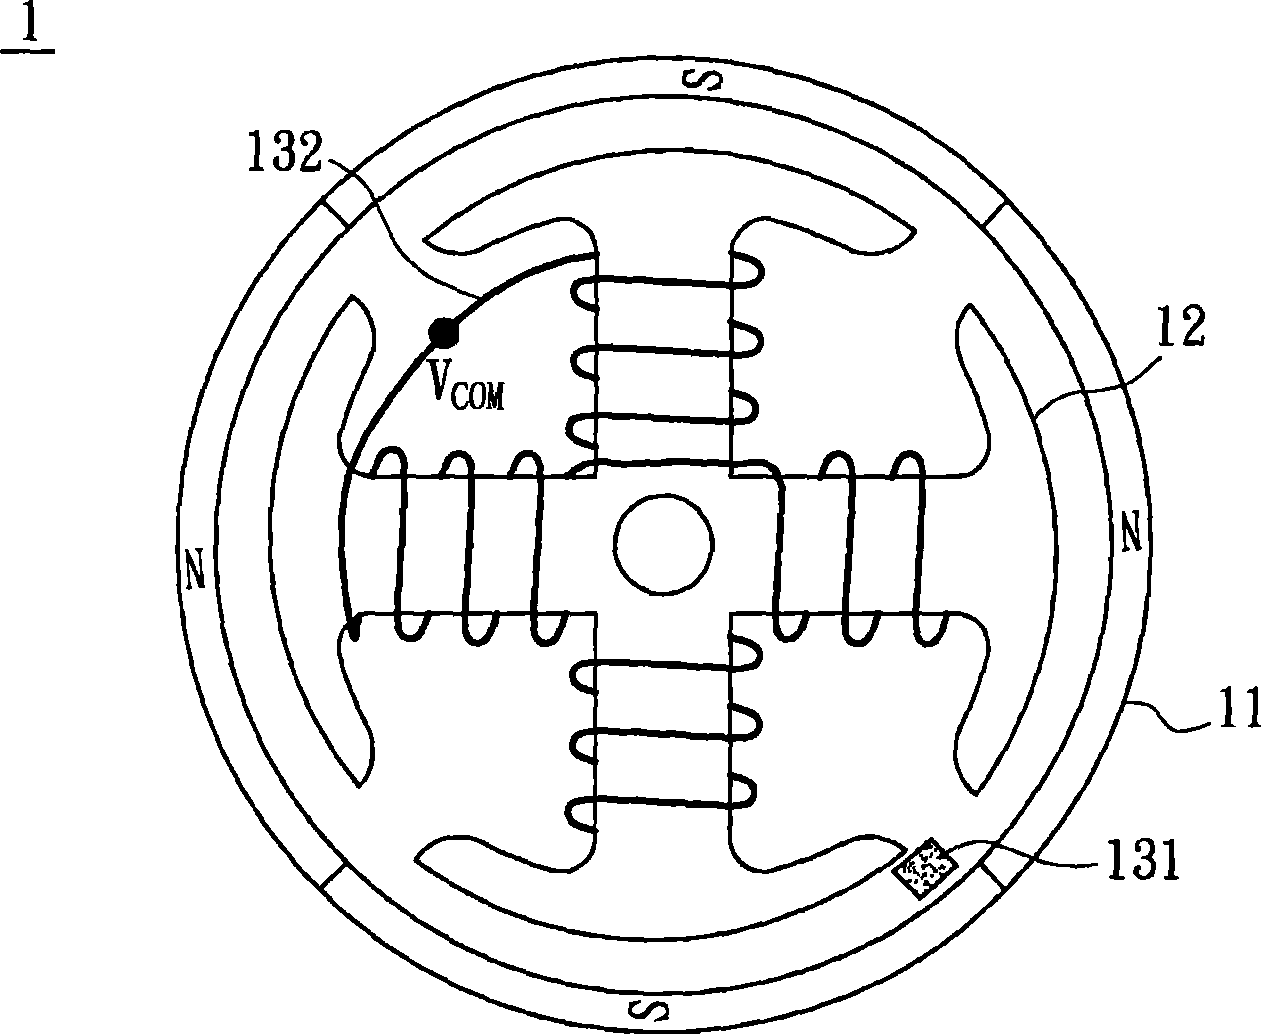 Motor and control circuit thereof